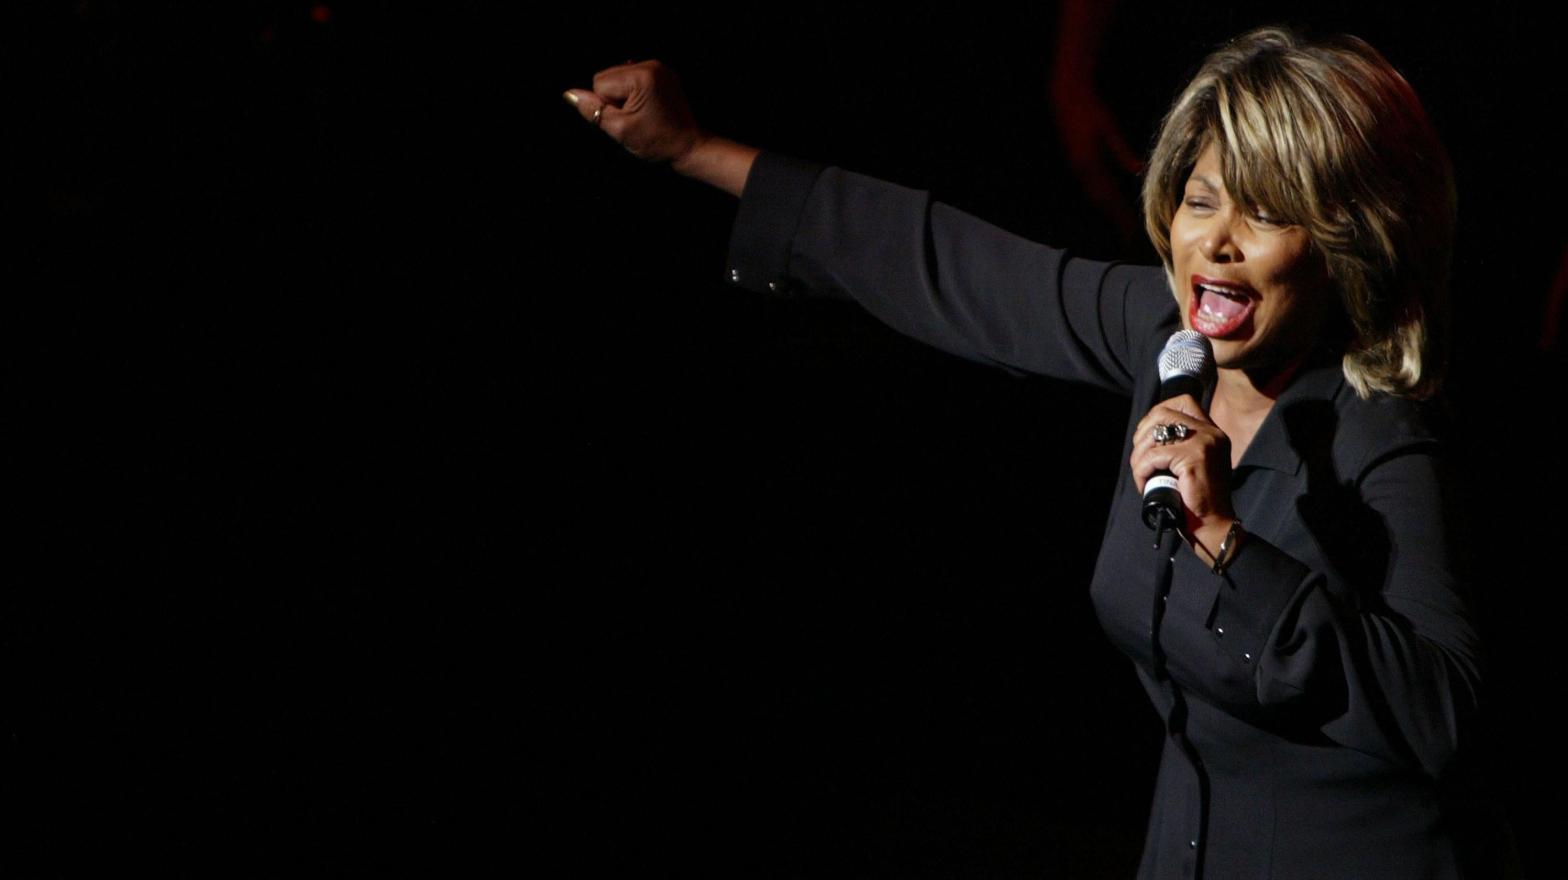 Singer Tina Turner performs after the Walt Disney Pictures premiere of Brother Bear October 20, 2003 in New York City. (Photo: Mark Mainz, Getty Images)